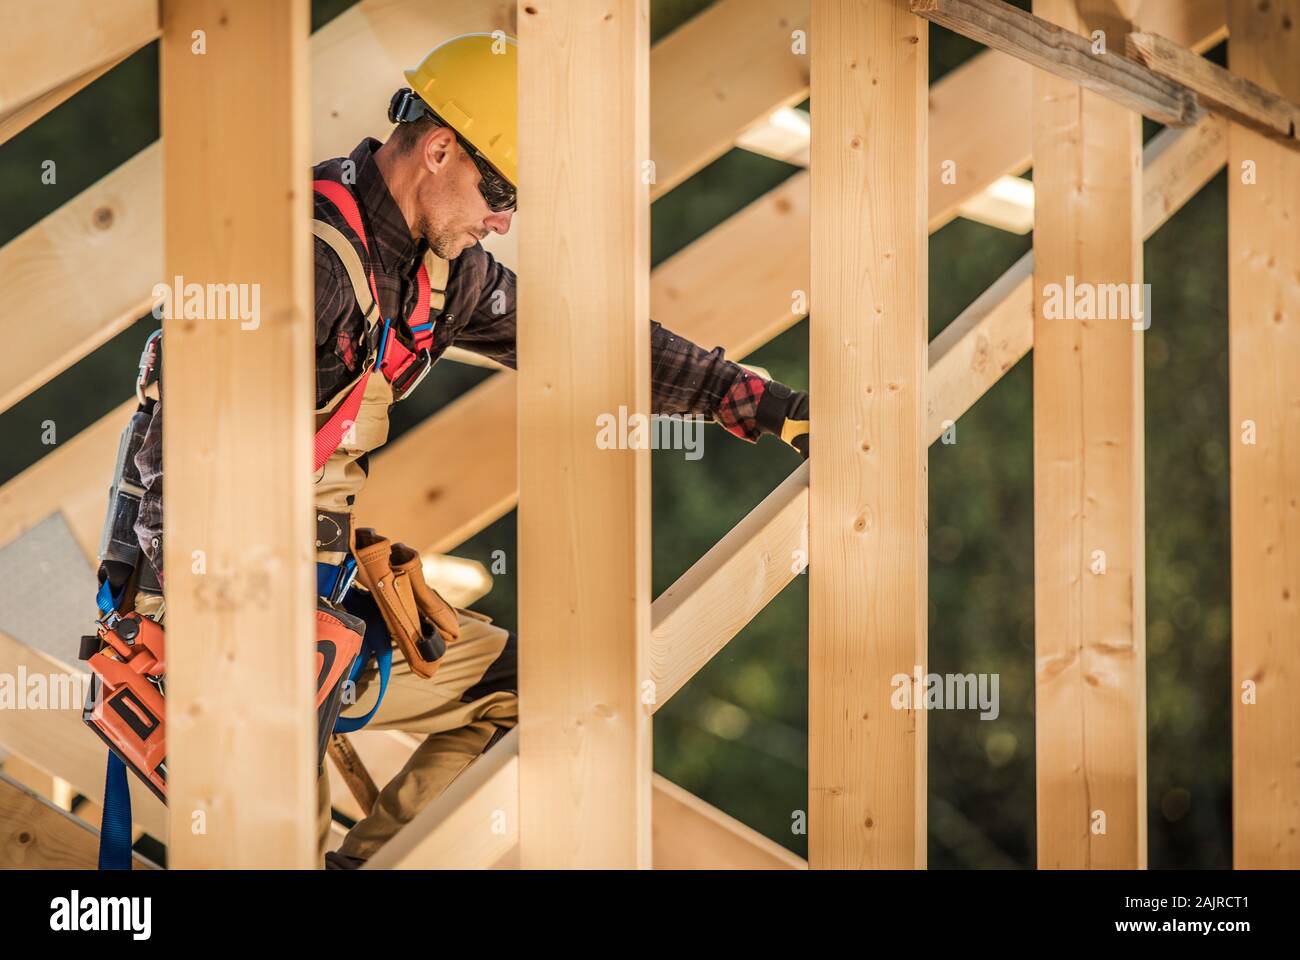 Wood Construction Job. Caucasian Contractor with Nail Gun in Hand Attaching Wood Beams. Industrial Theme. Stock Photo